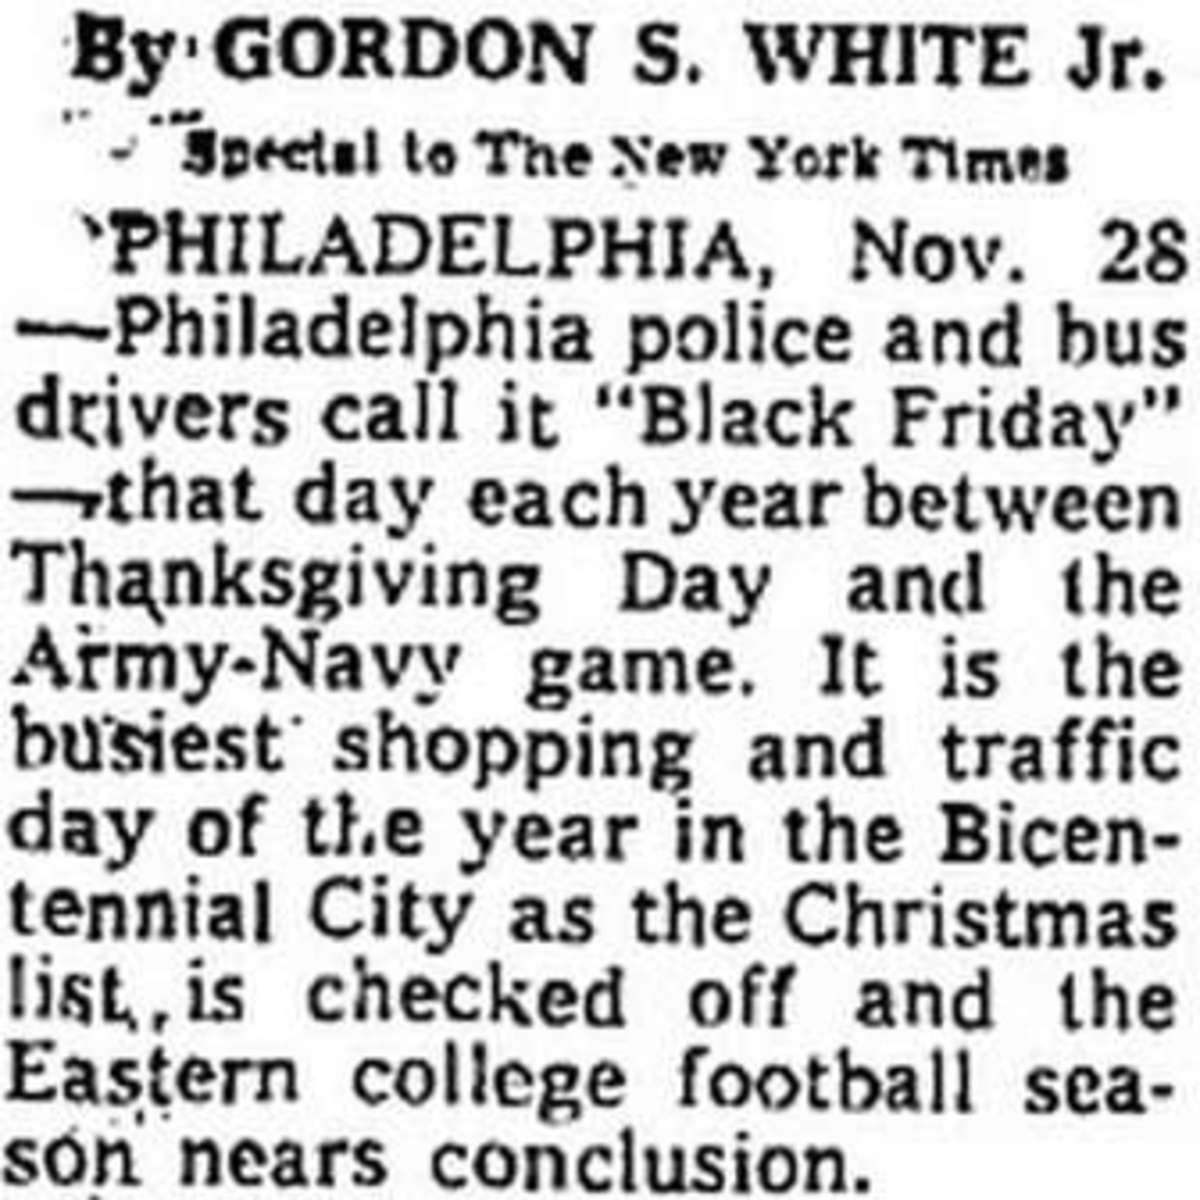 Old newspaper clippings support the true origin of the Black Friday name.